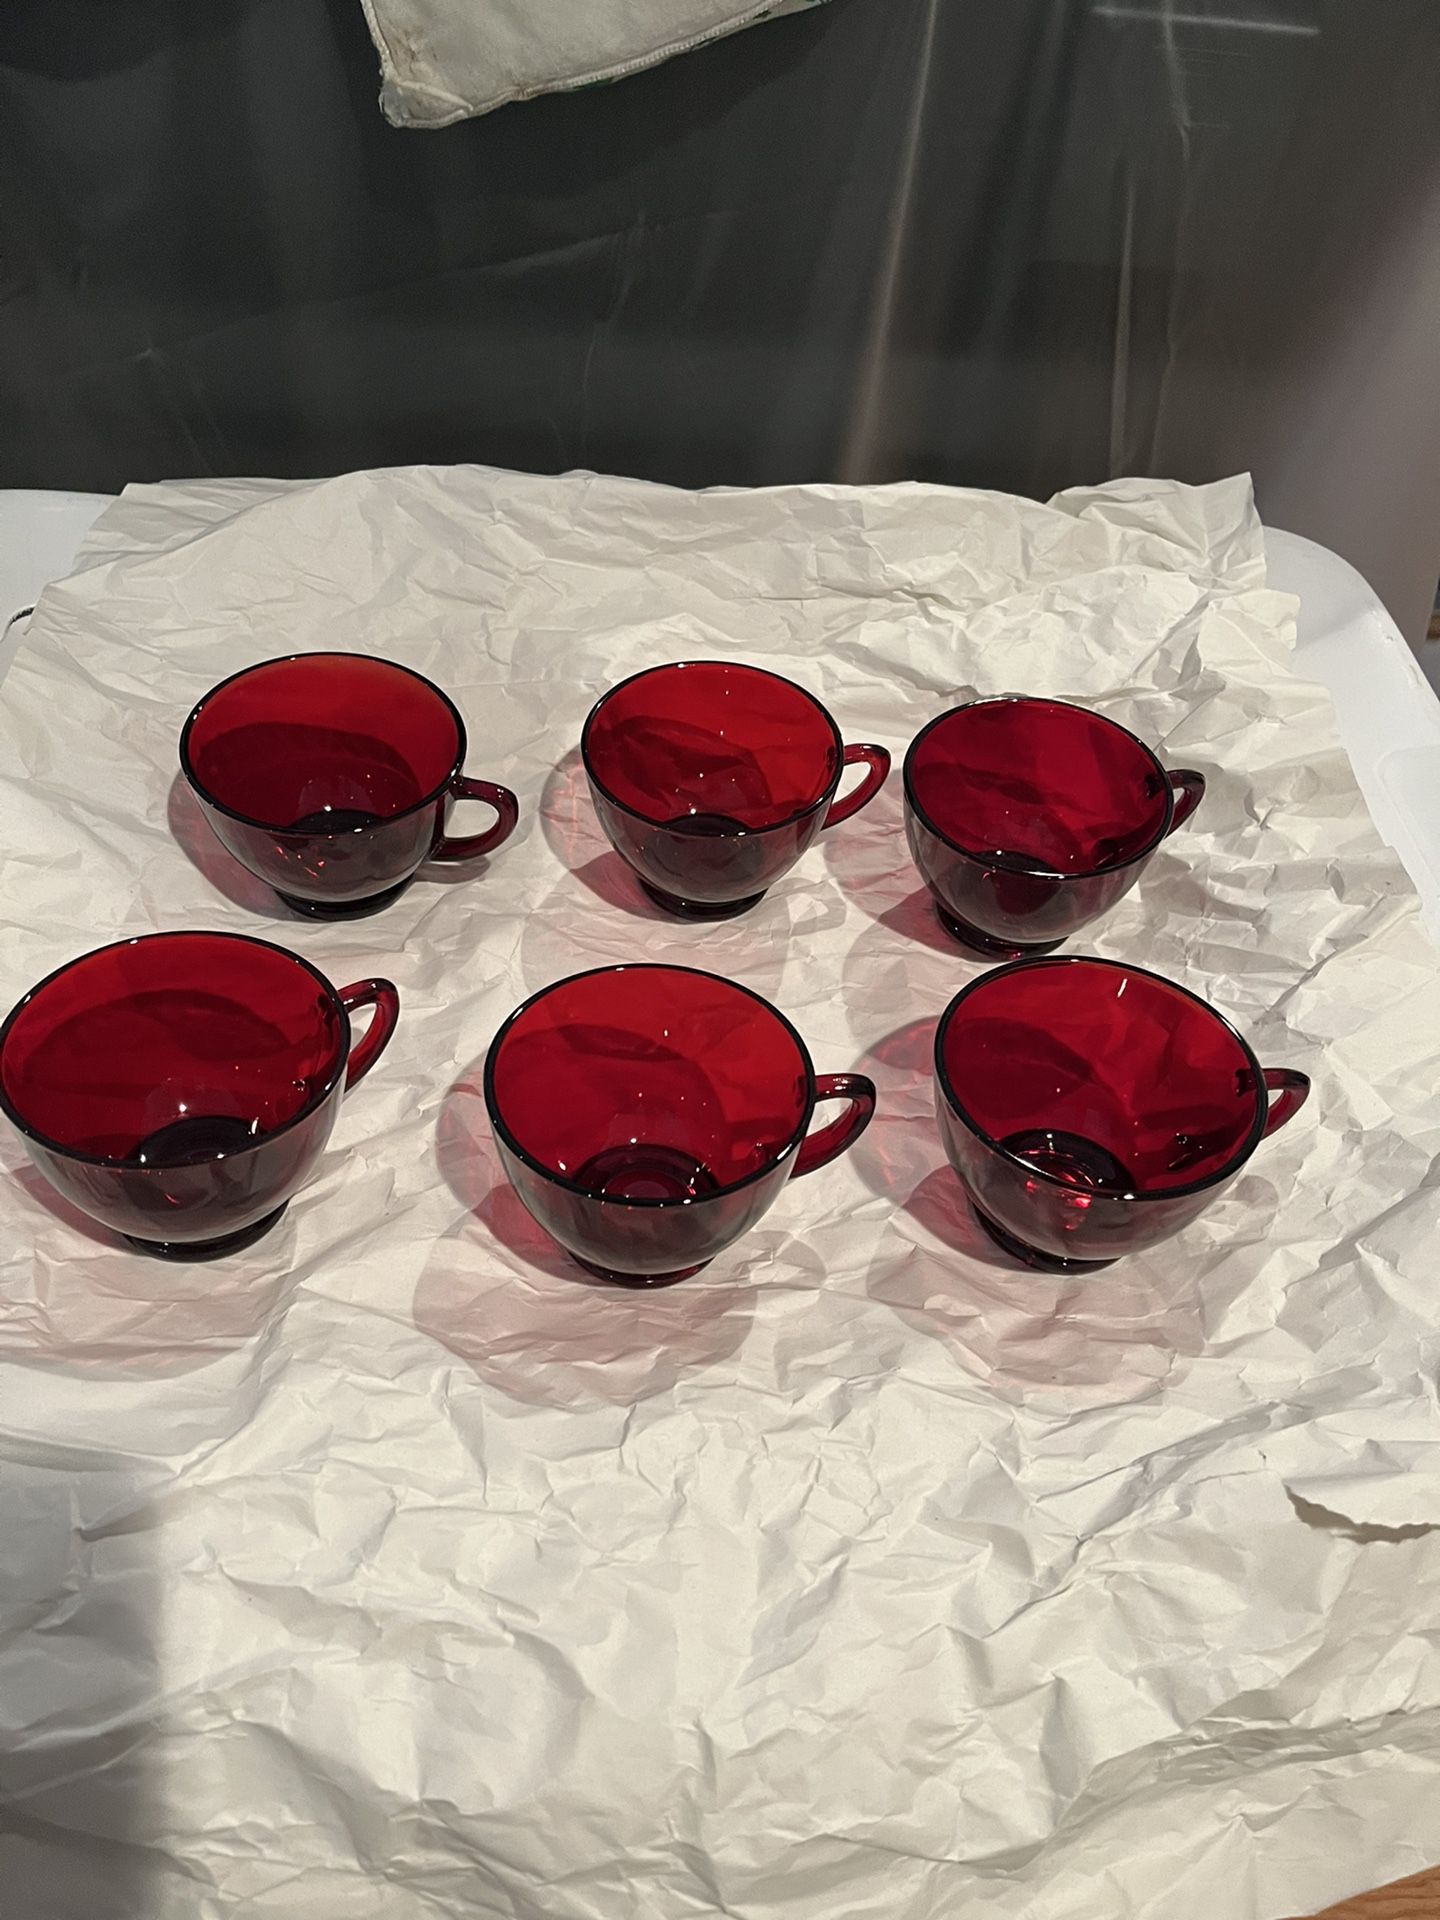 6 Vintage Red Glass Tea Cups 